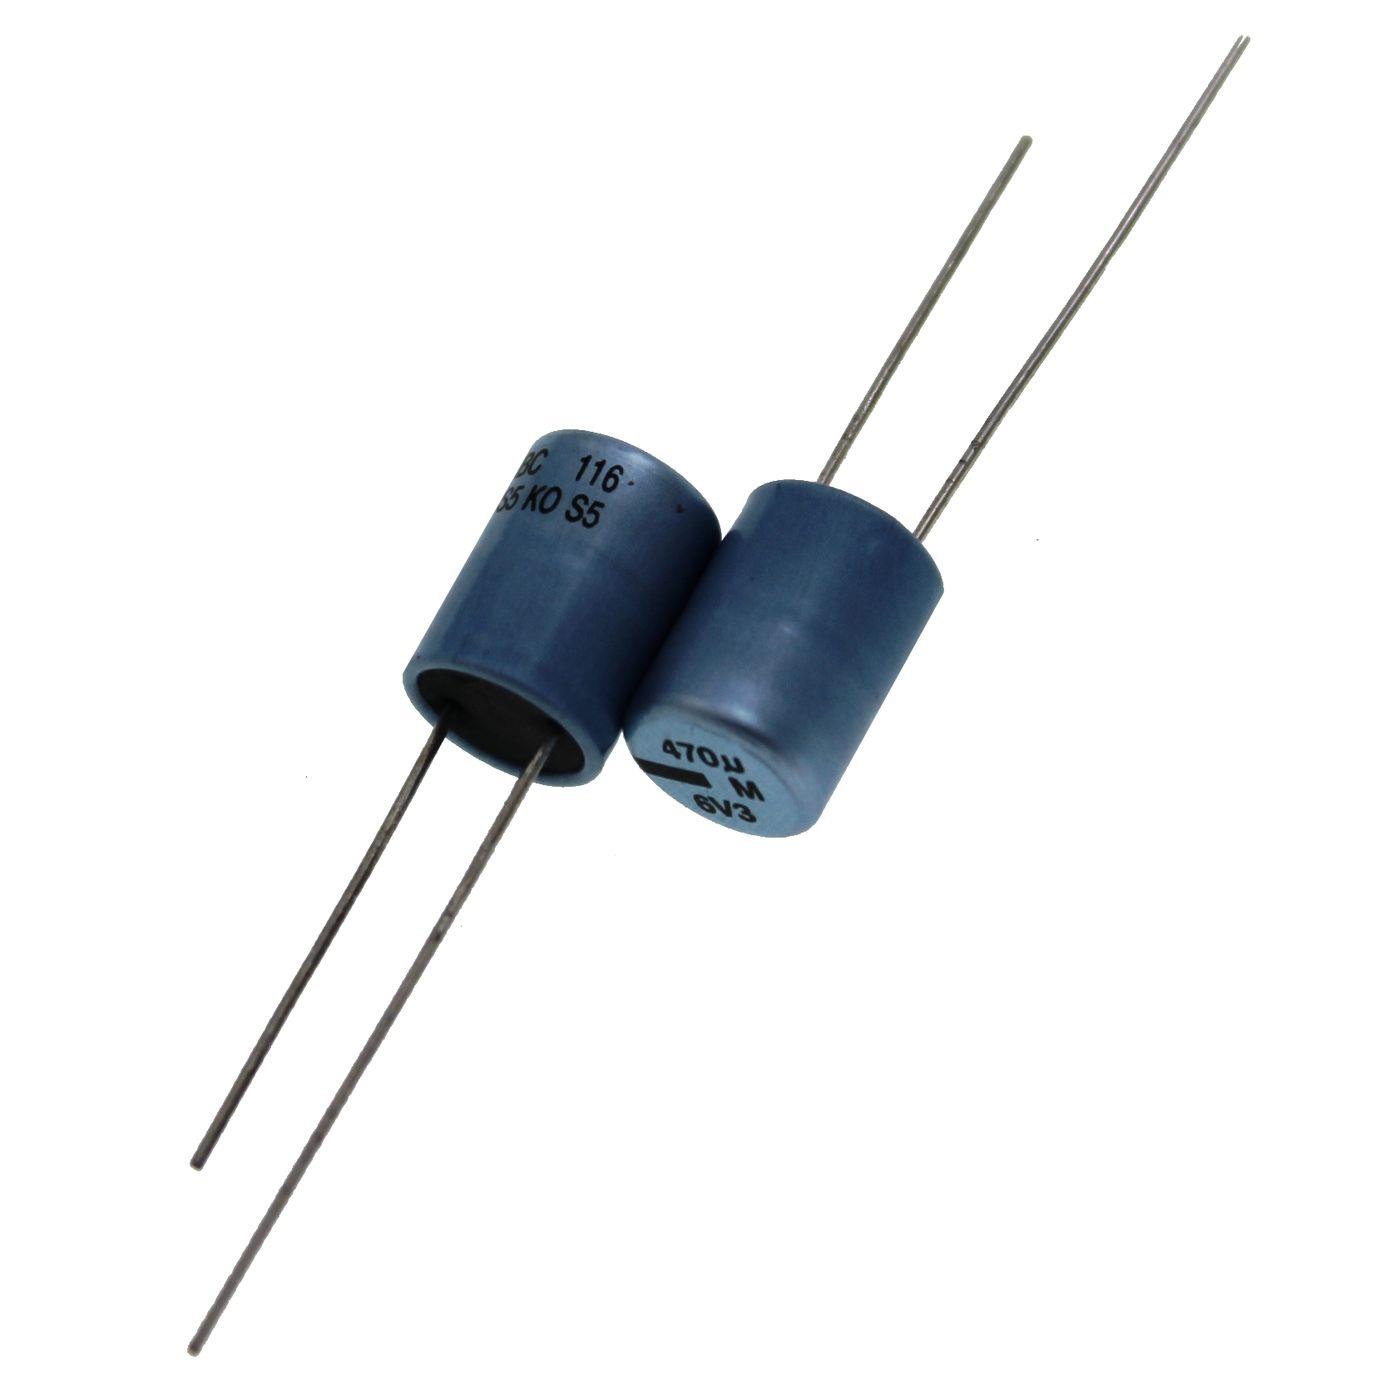 Electrolytic capacitor Radial 470µF 6,3V 105°C 222211653471 d8x11mm 470uF